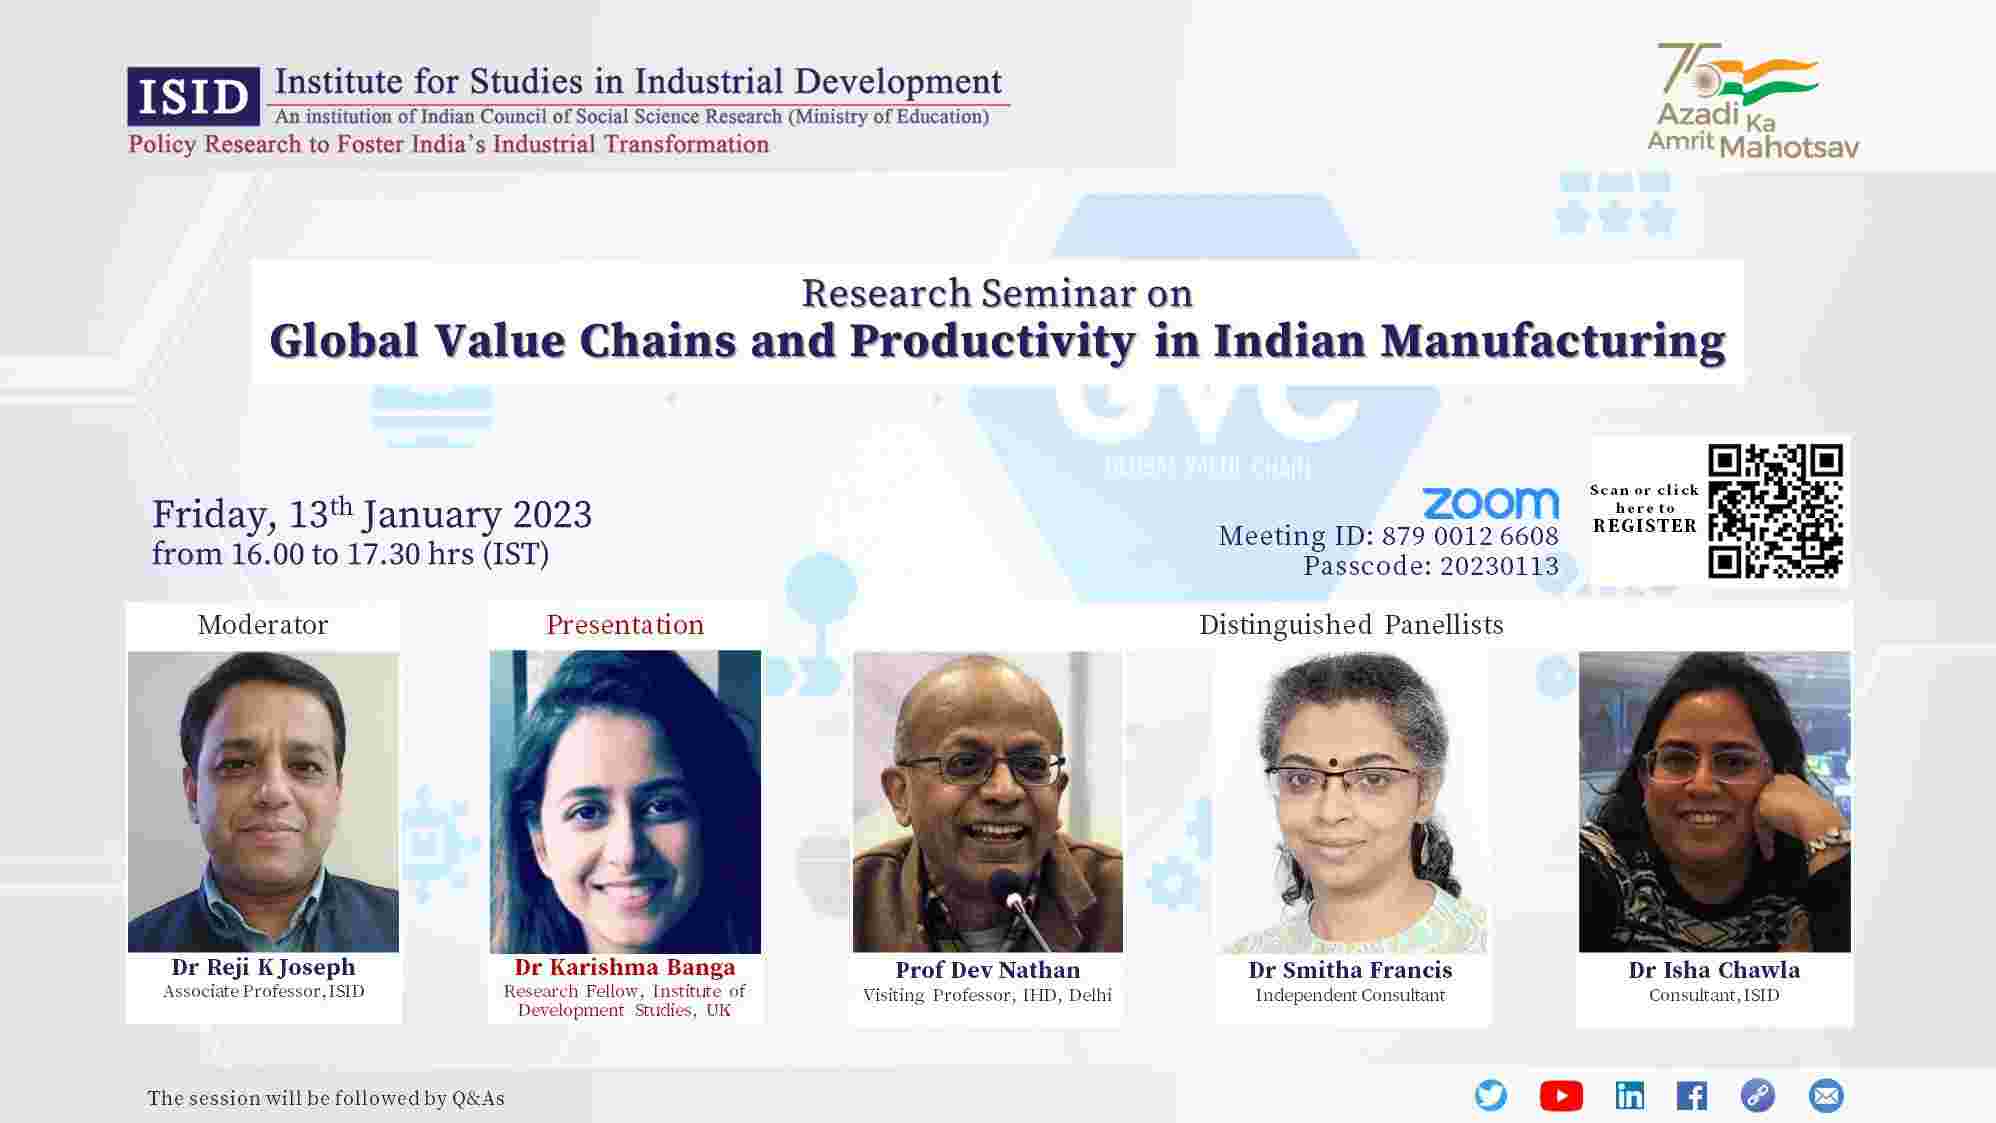 Research Seminar on Global Value Chains and Productivity in Indian Manufacturing